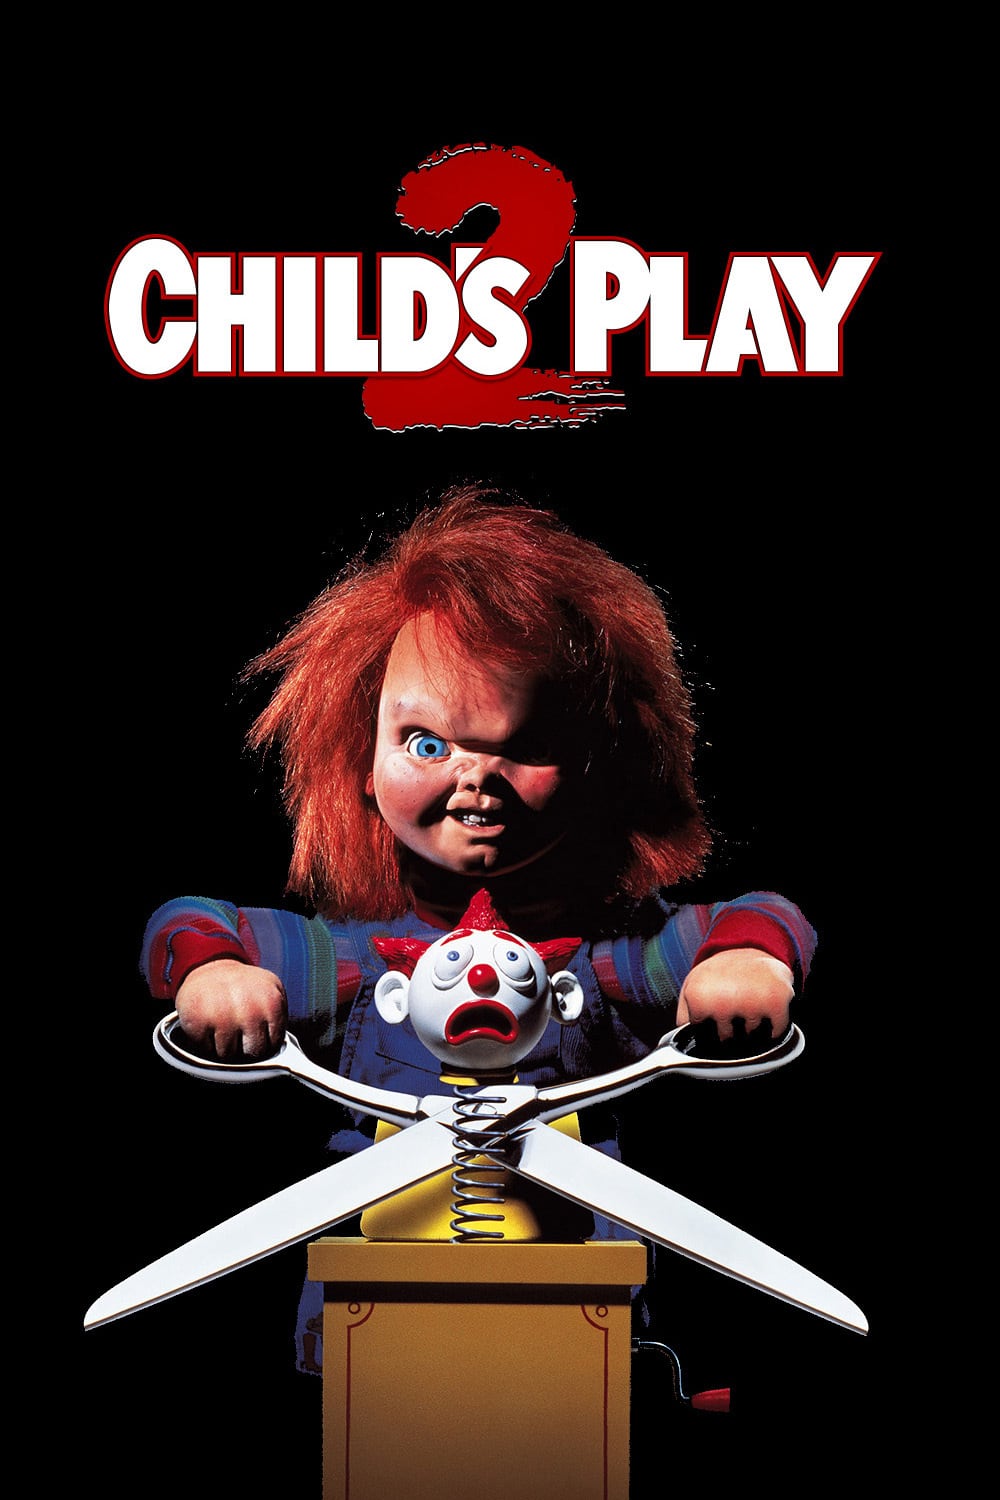 Childs Play 2 Movie Poster High Quality Glossy Paper A1 A2 A3 A4 A3 Framed or Unframed!!!